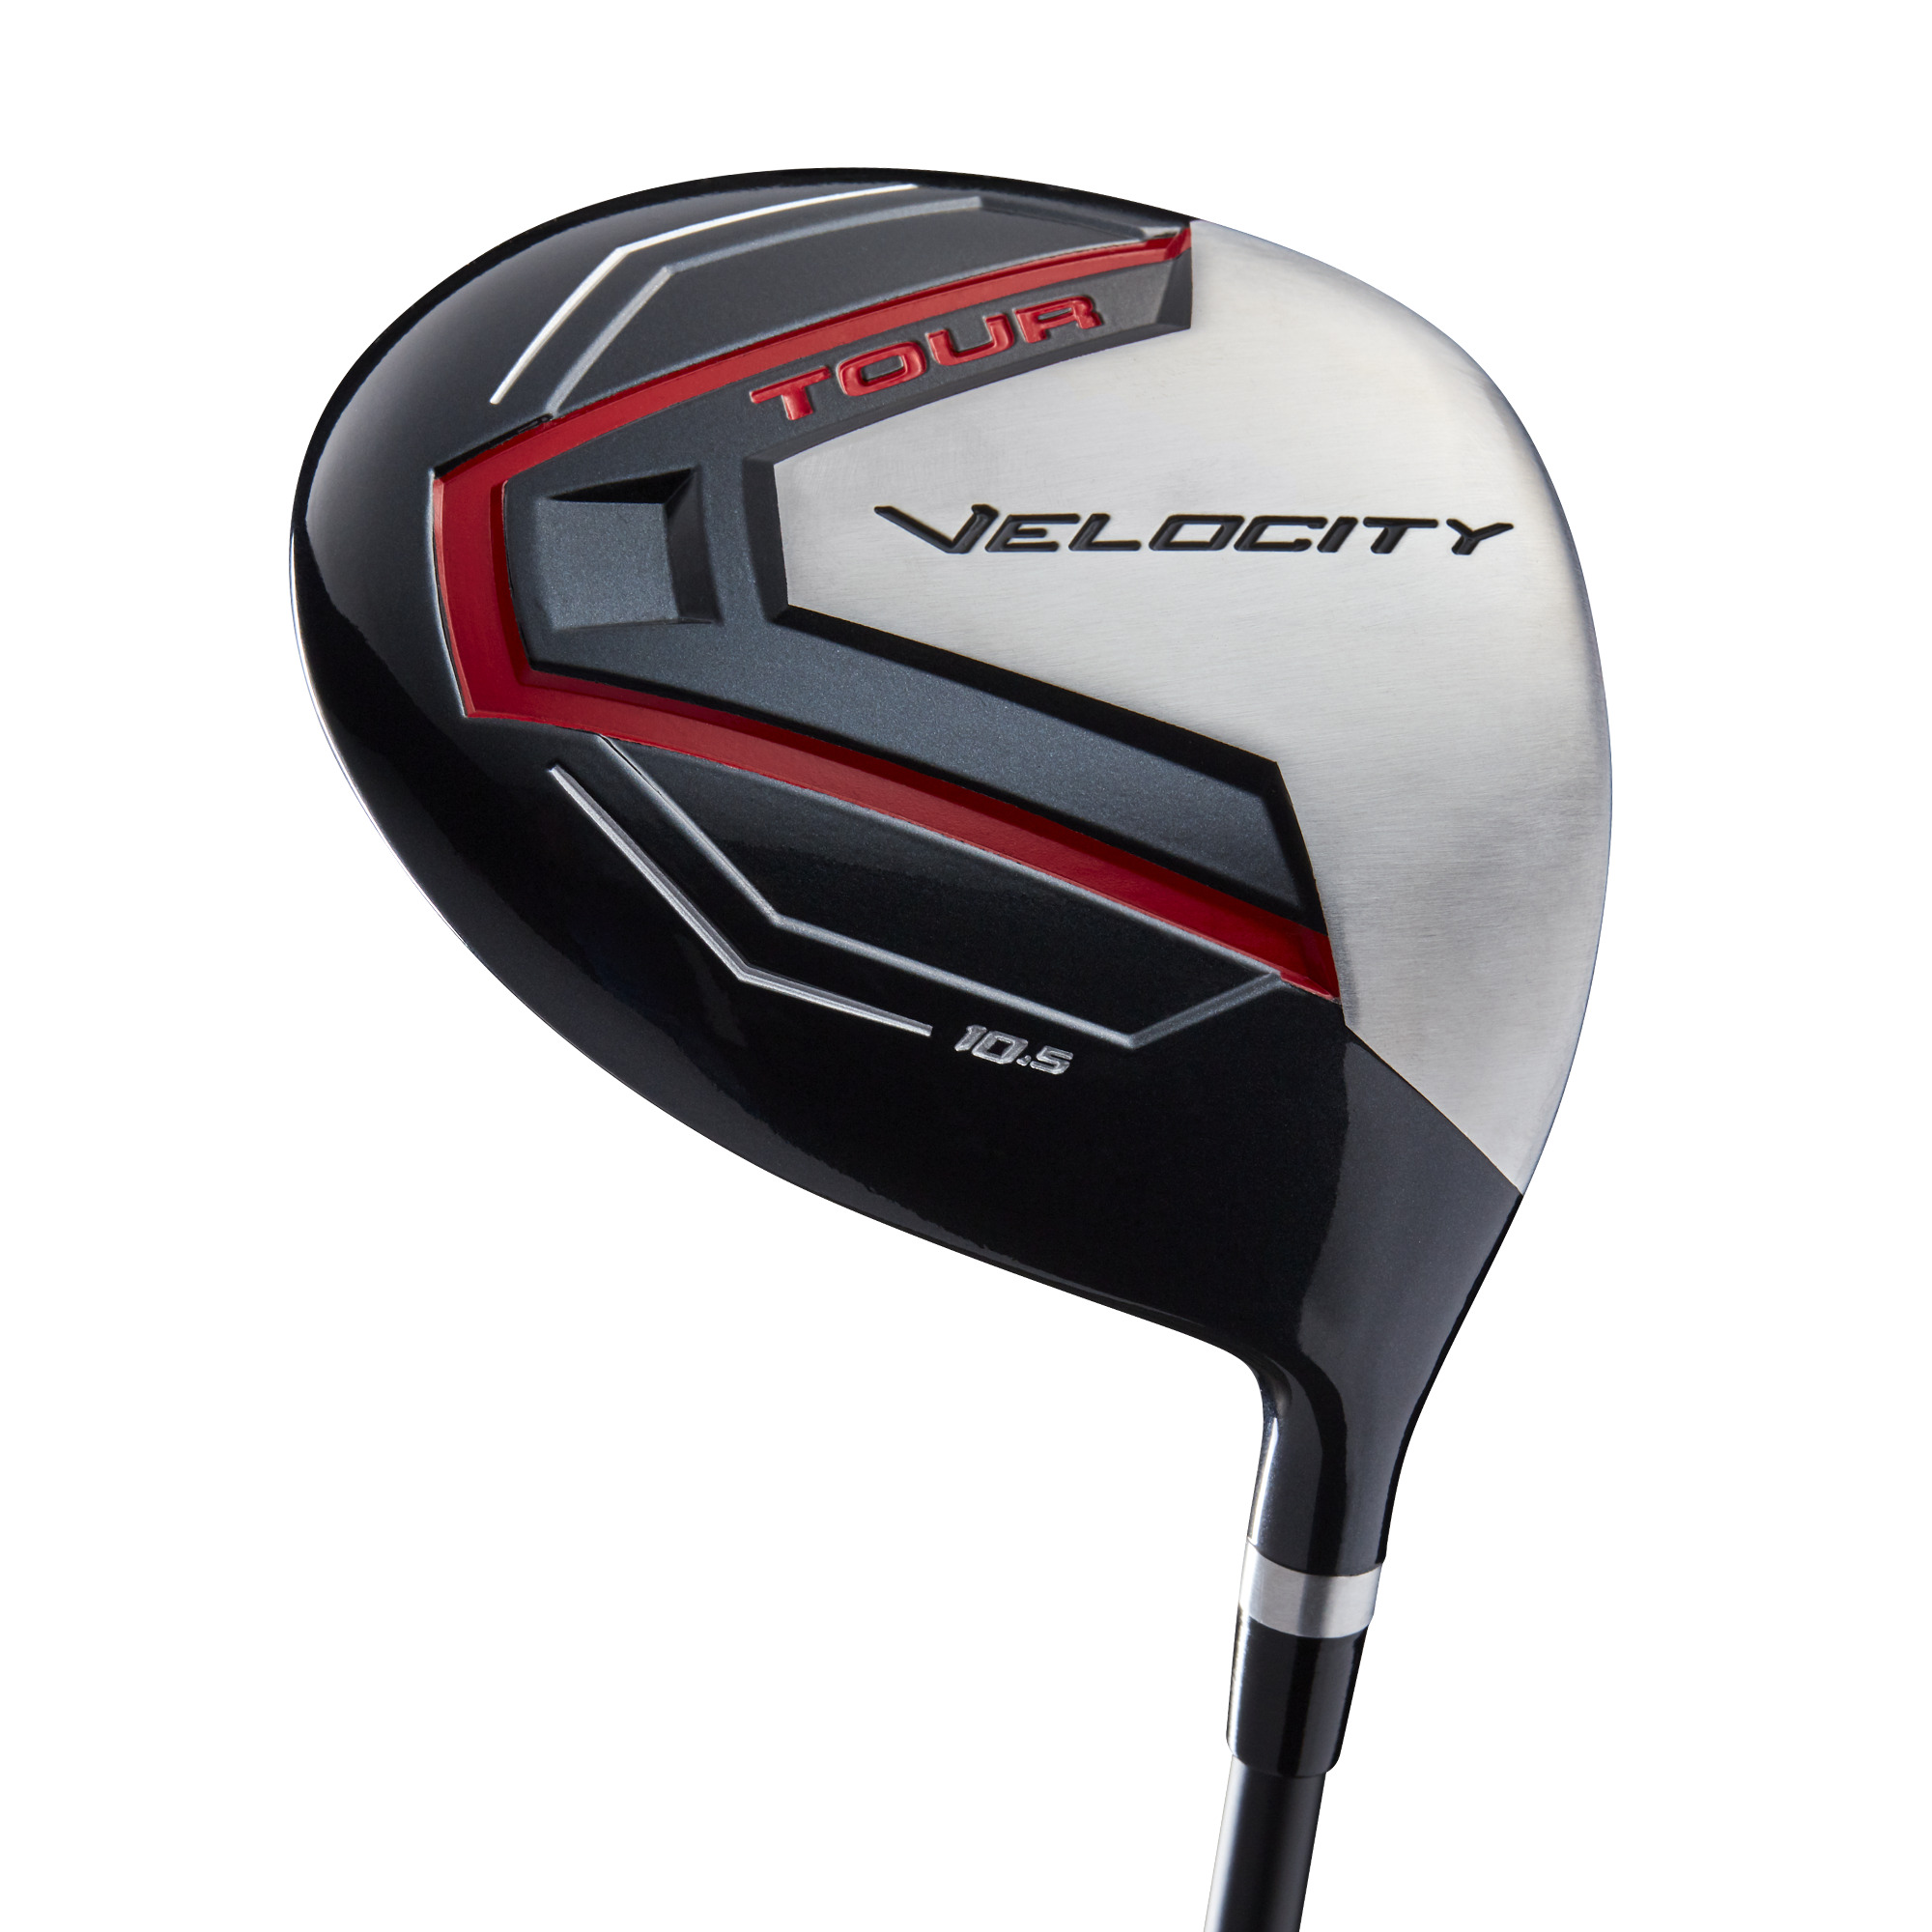 Wilson Tour Velocity Men's Golf Club Set, Right-Handed - image 3 of 7